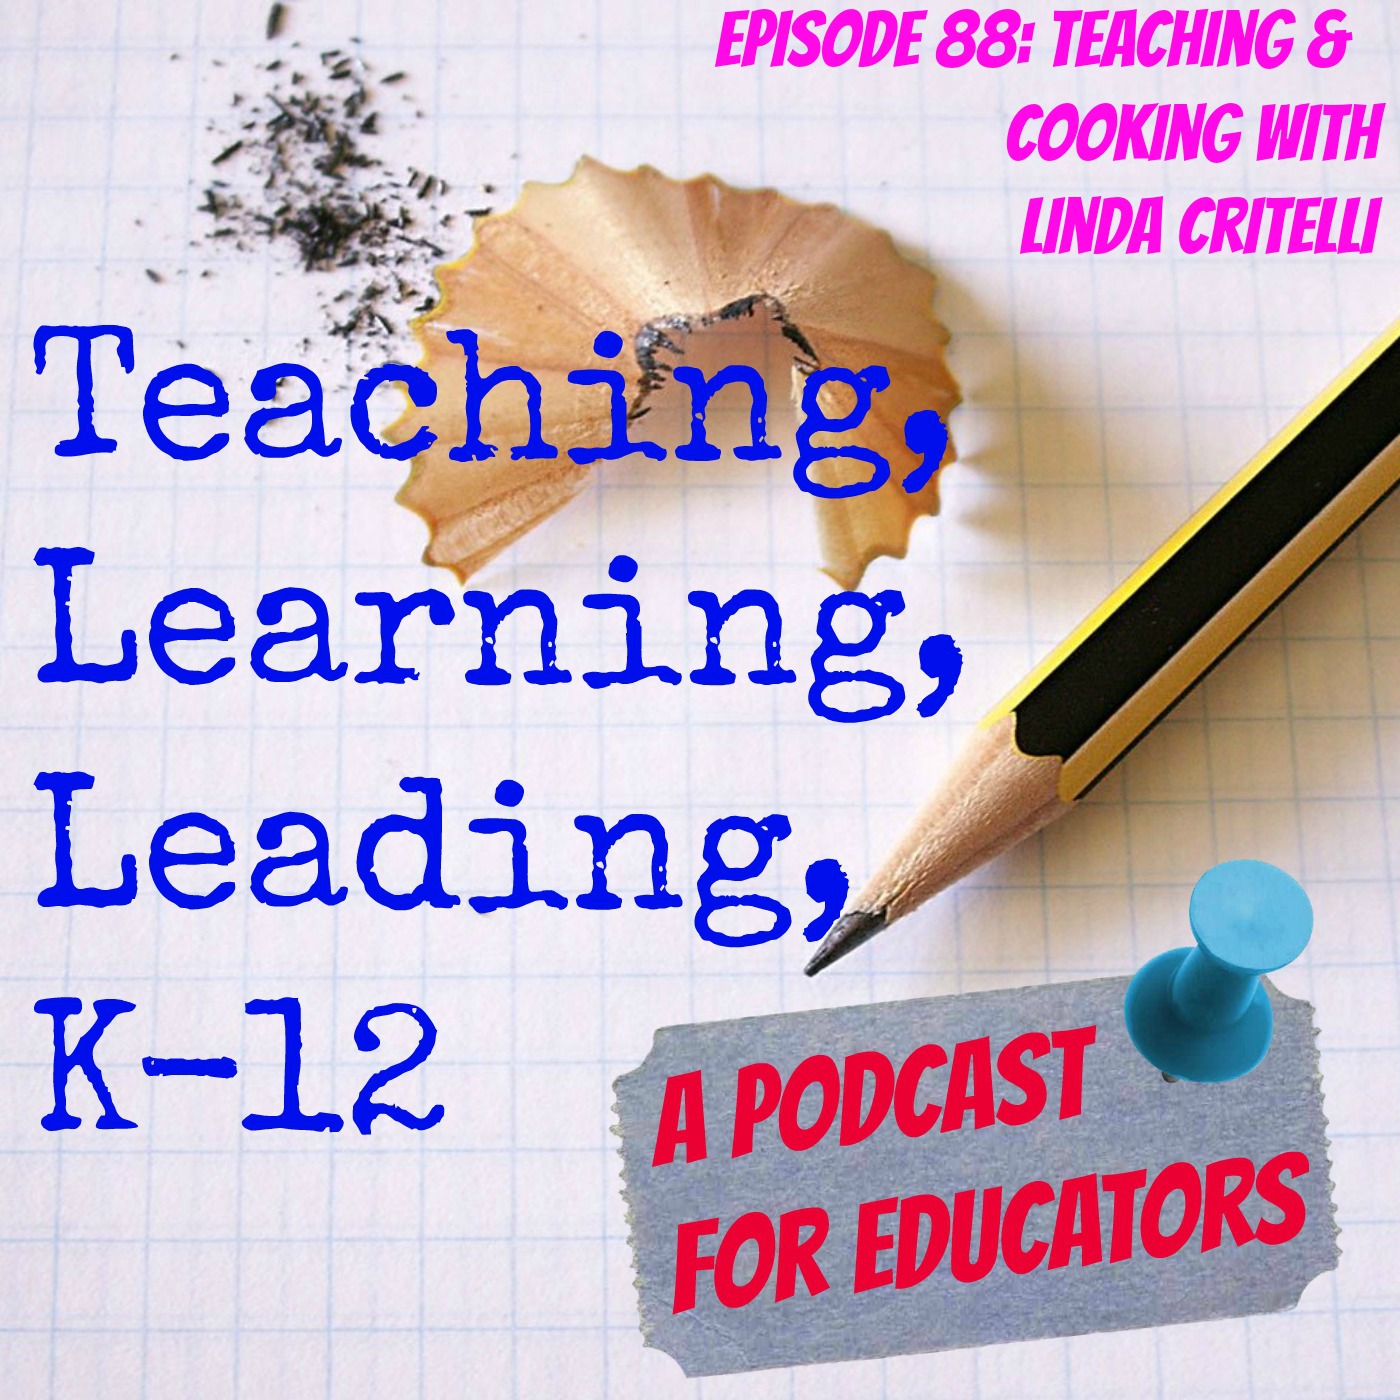 Episode 88: Teaching and Cooking with Linda Critelli